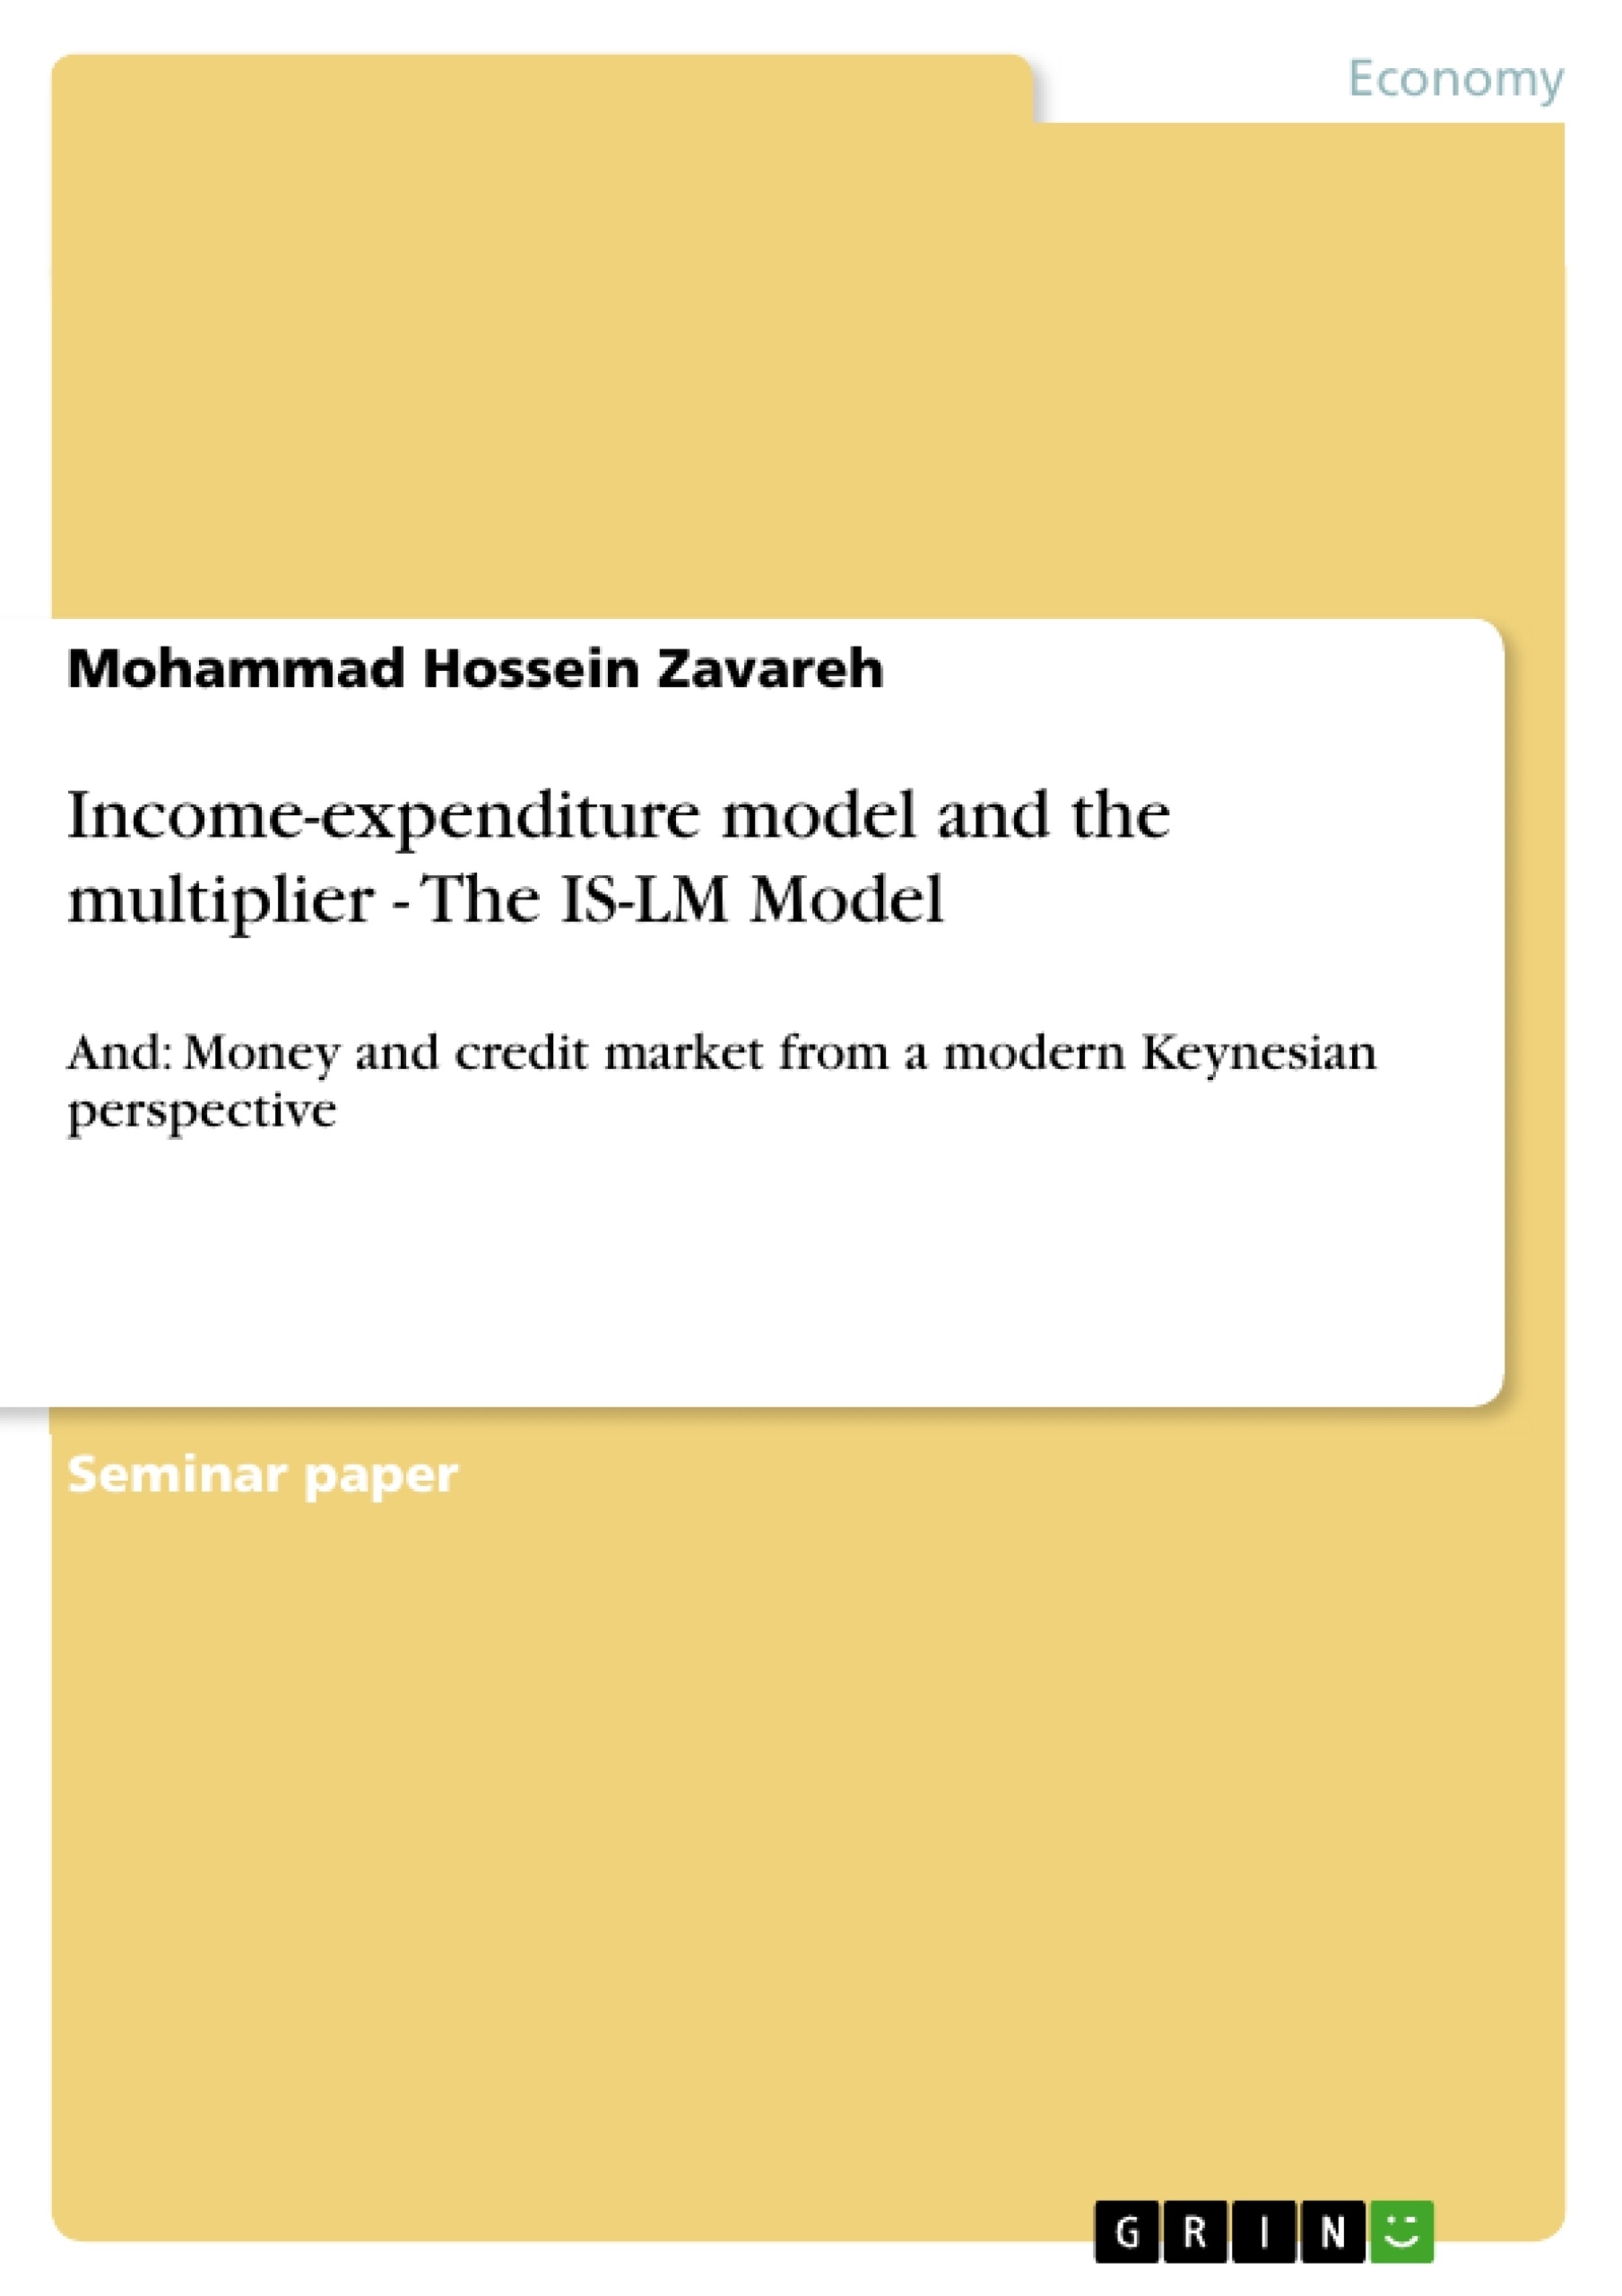 Título: Income-expenditure model and the multiplier - The IS-LM Model